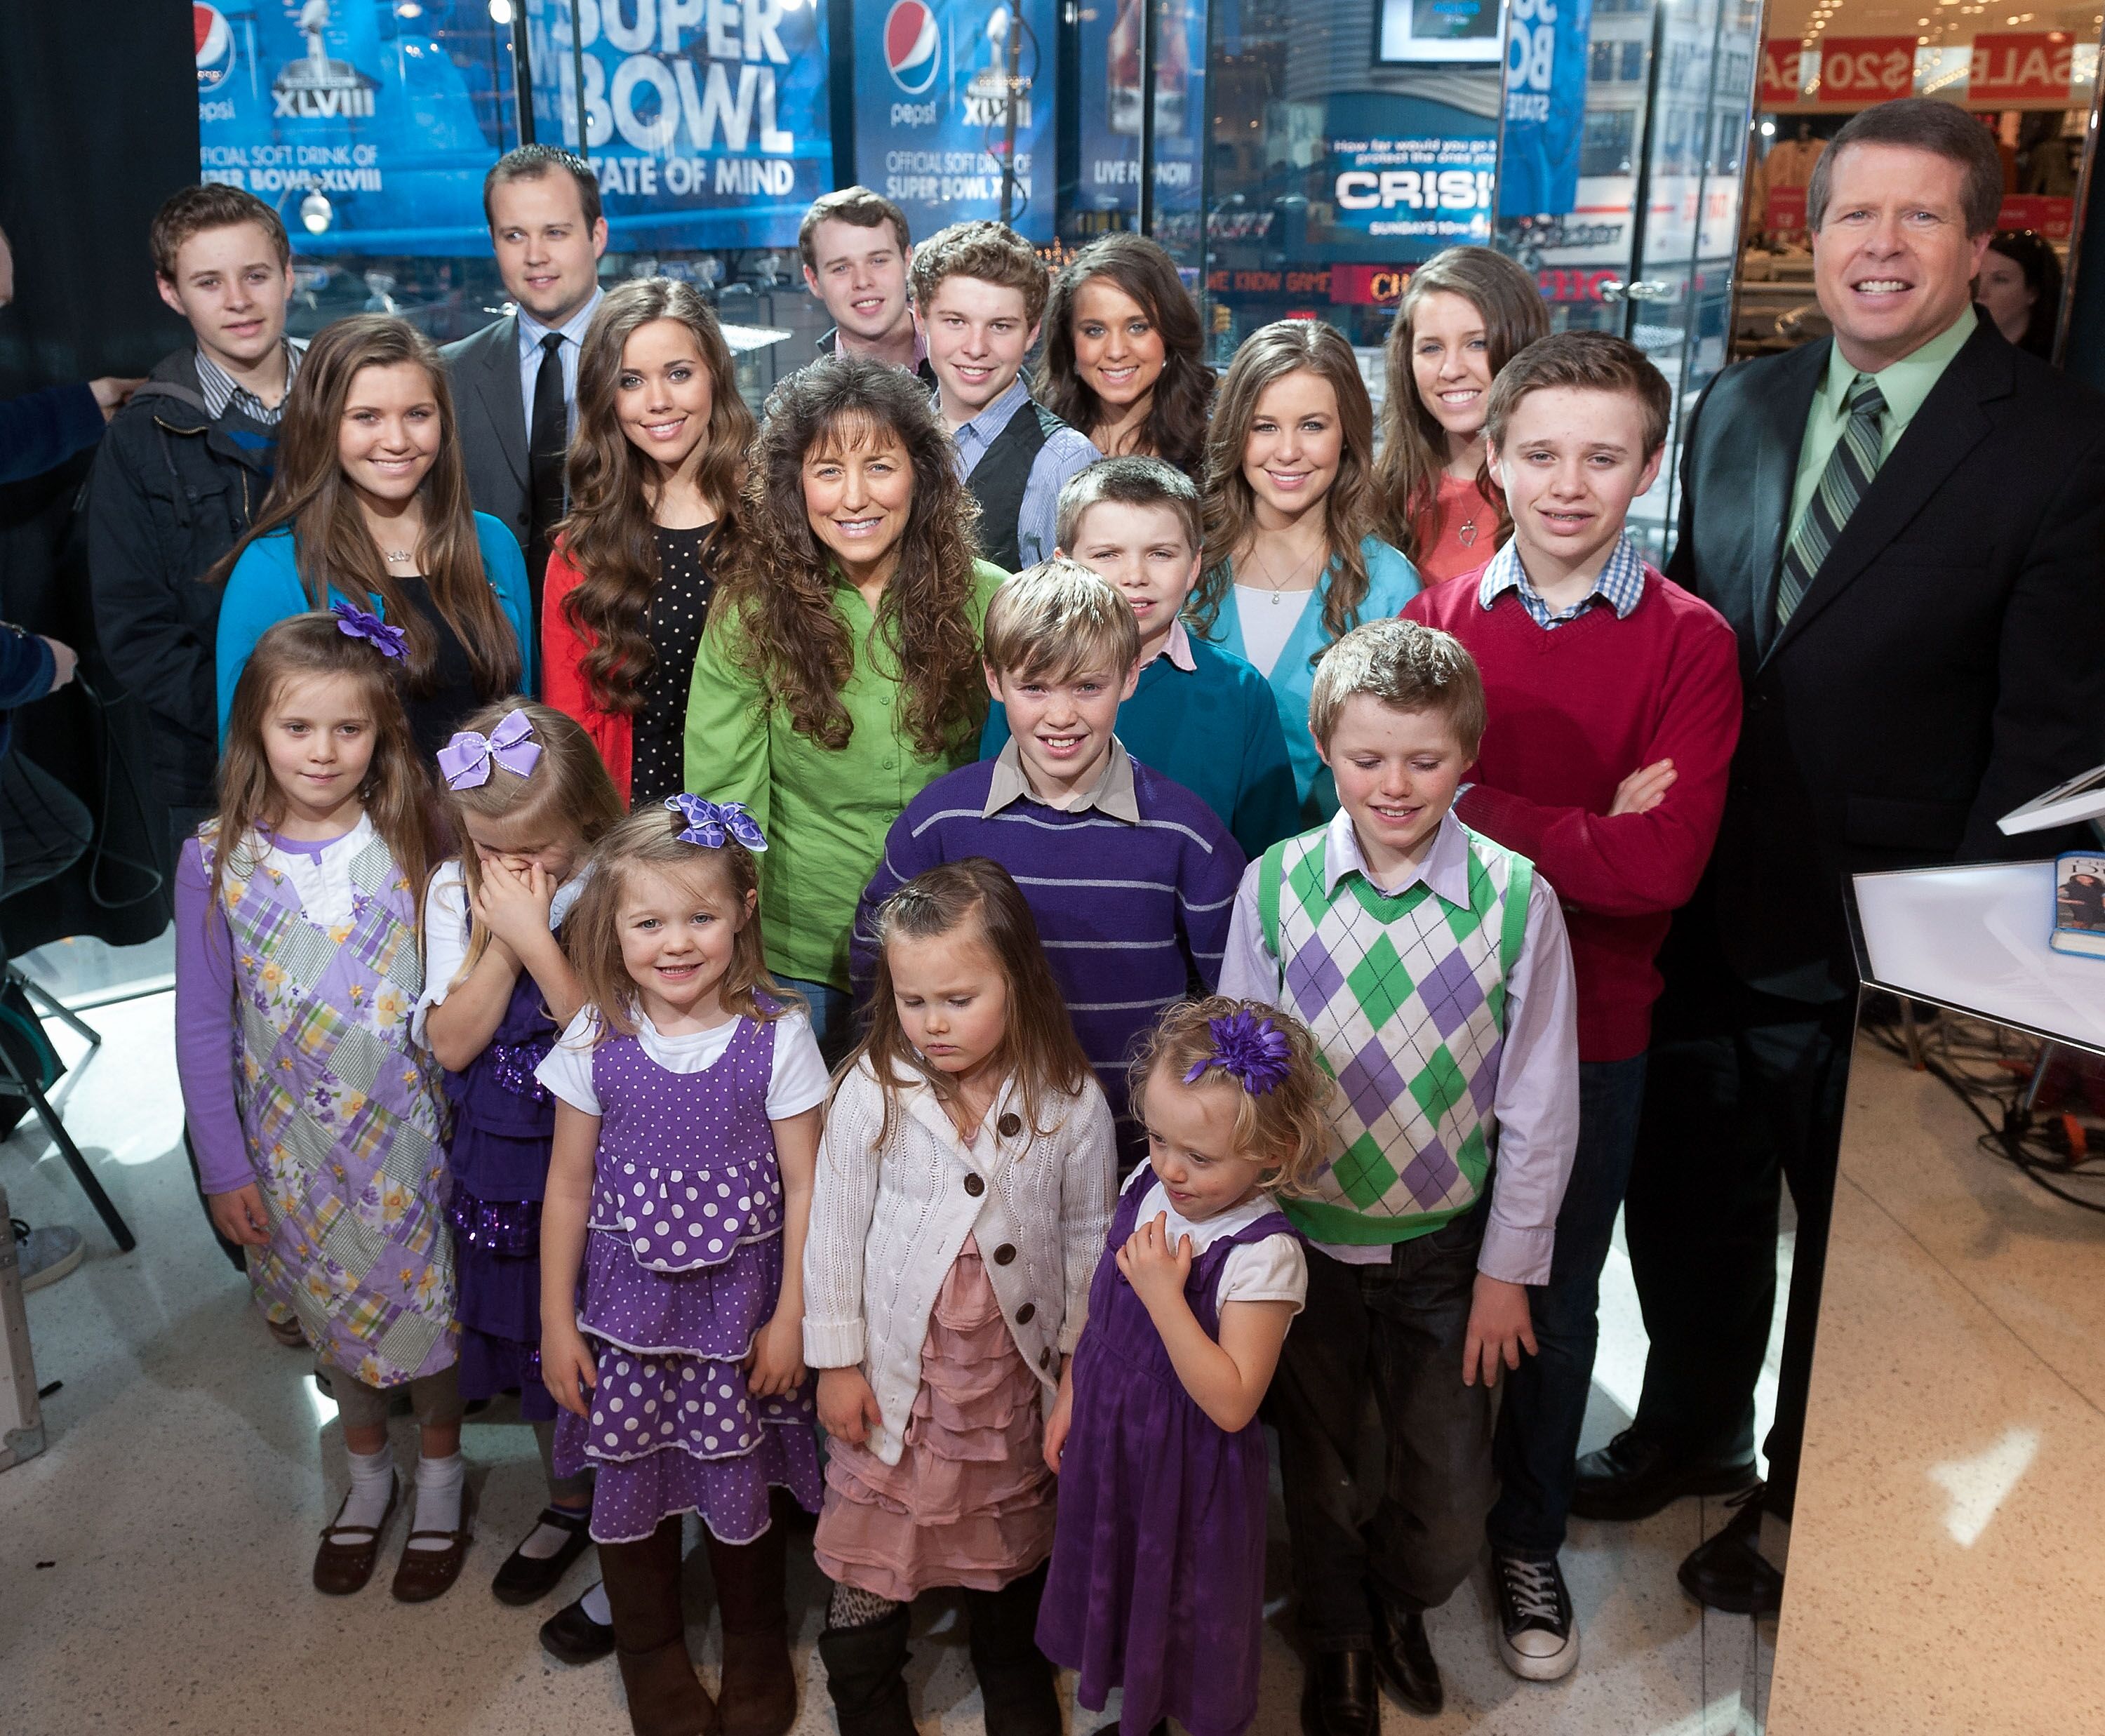 The Duggar family visits "Extra" at their New York studios at H&M in Times Square on March 11, 2014 | Photo: Getty Images